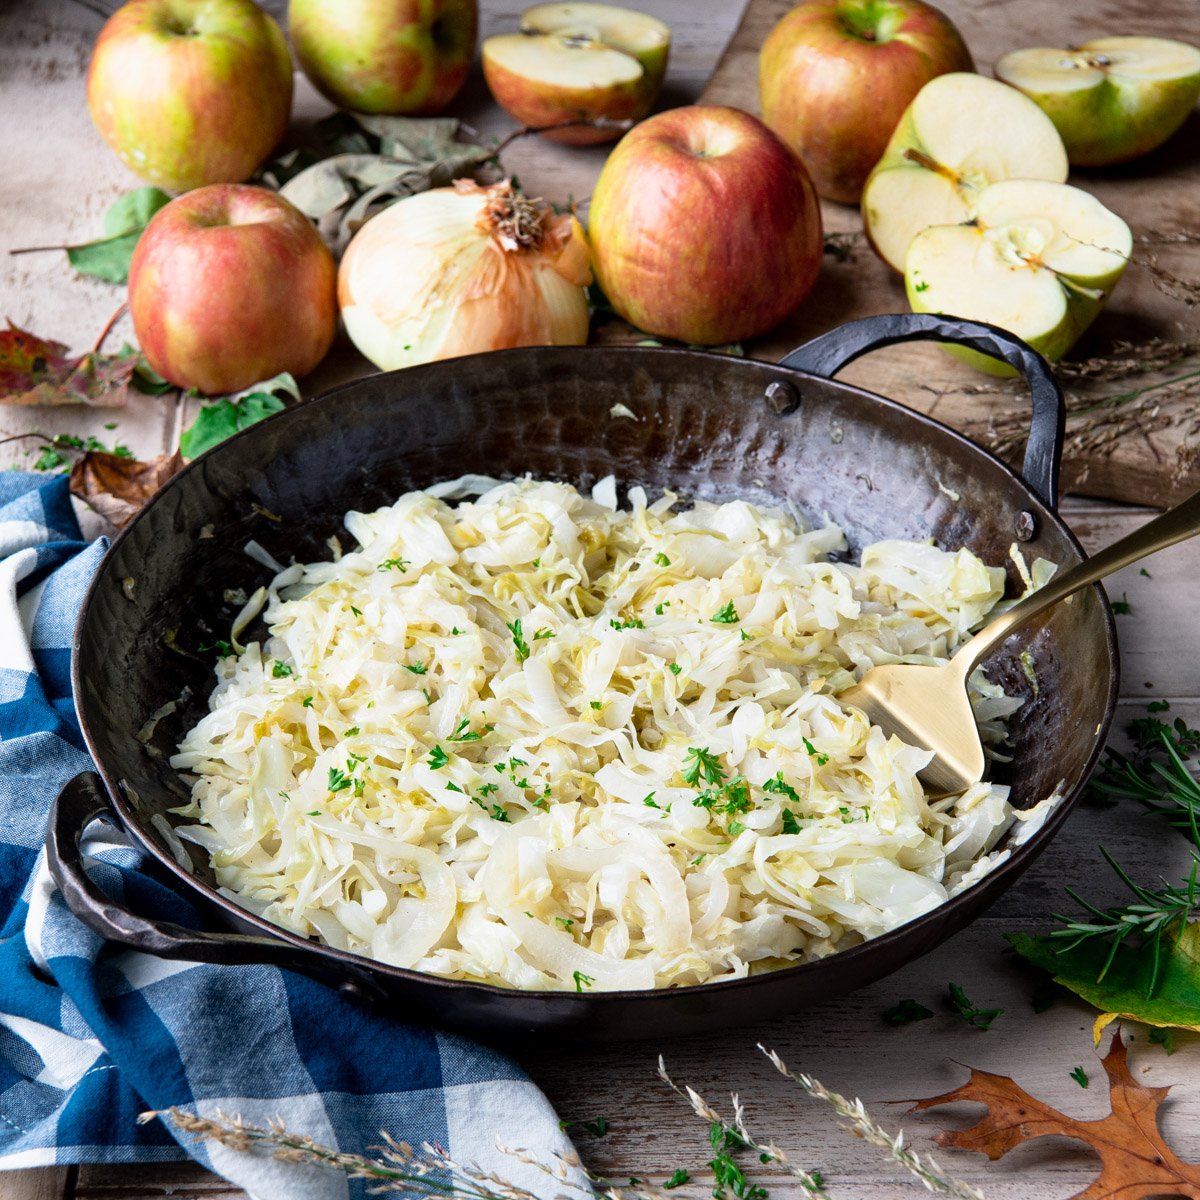 Fried Cabbage with Apples and Onion - The Seasoned Mom